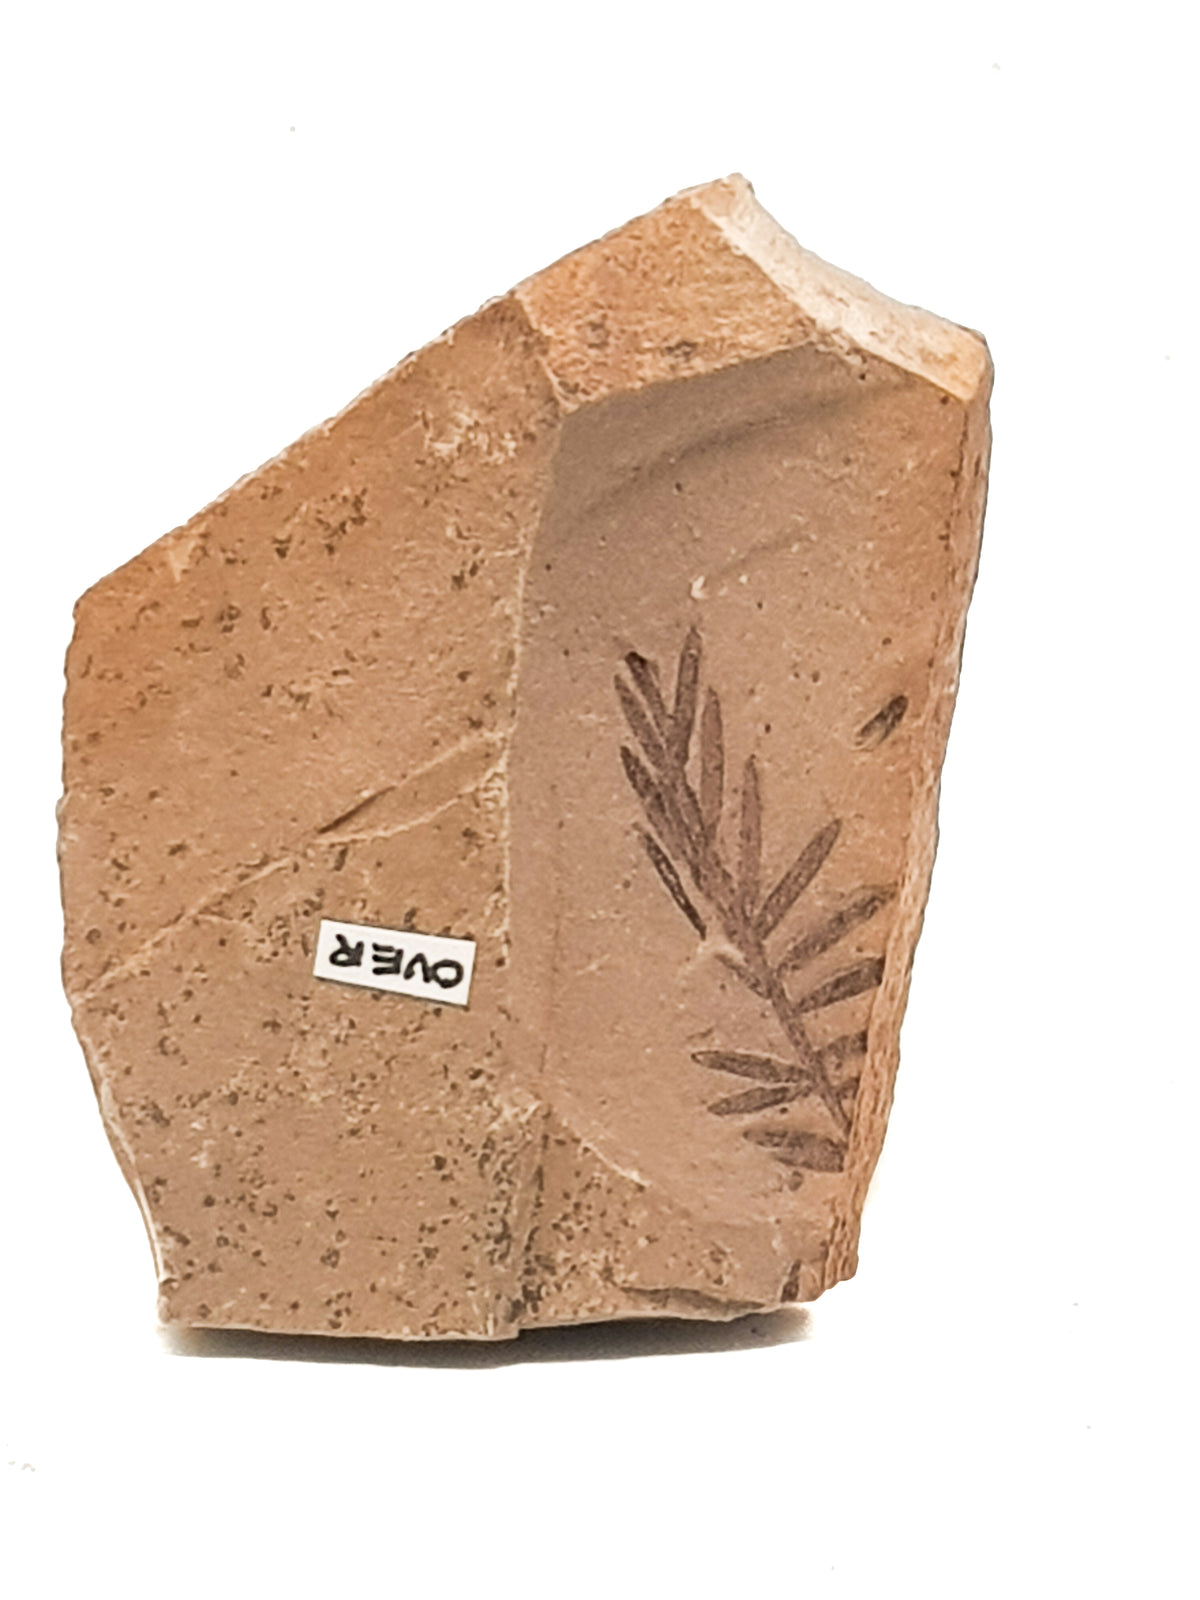 Fossilised metasequoia (dawn redwood) leaf on a beige matrix. a small handwritten label says OVER